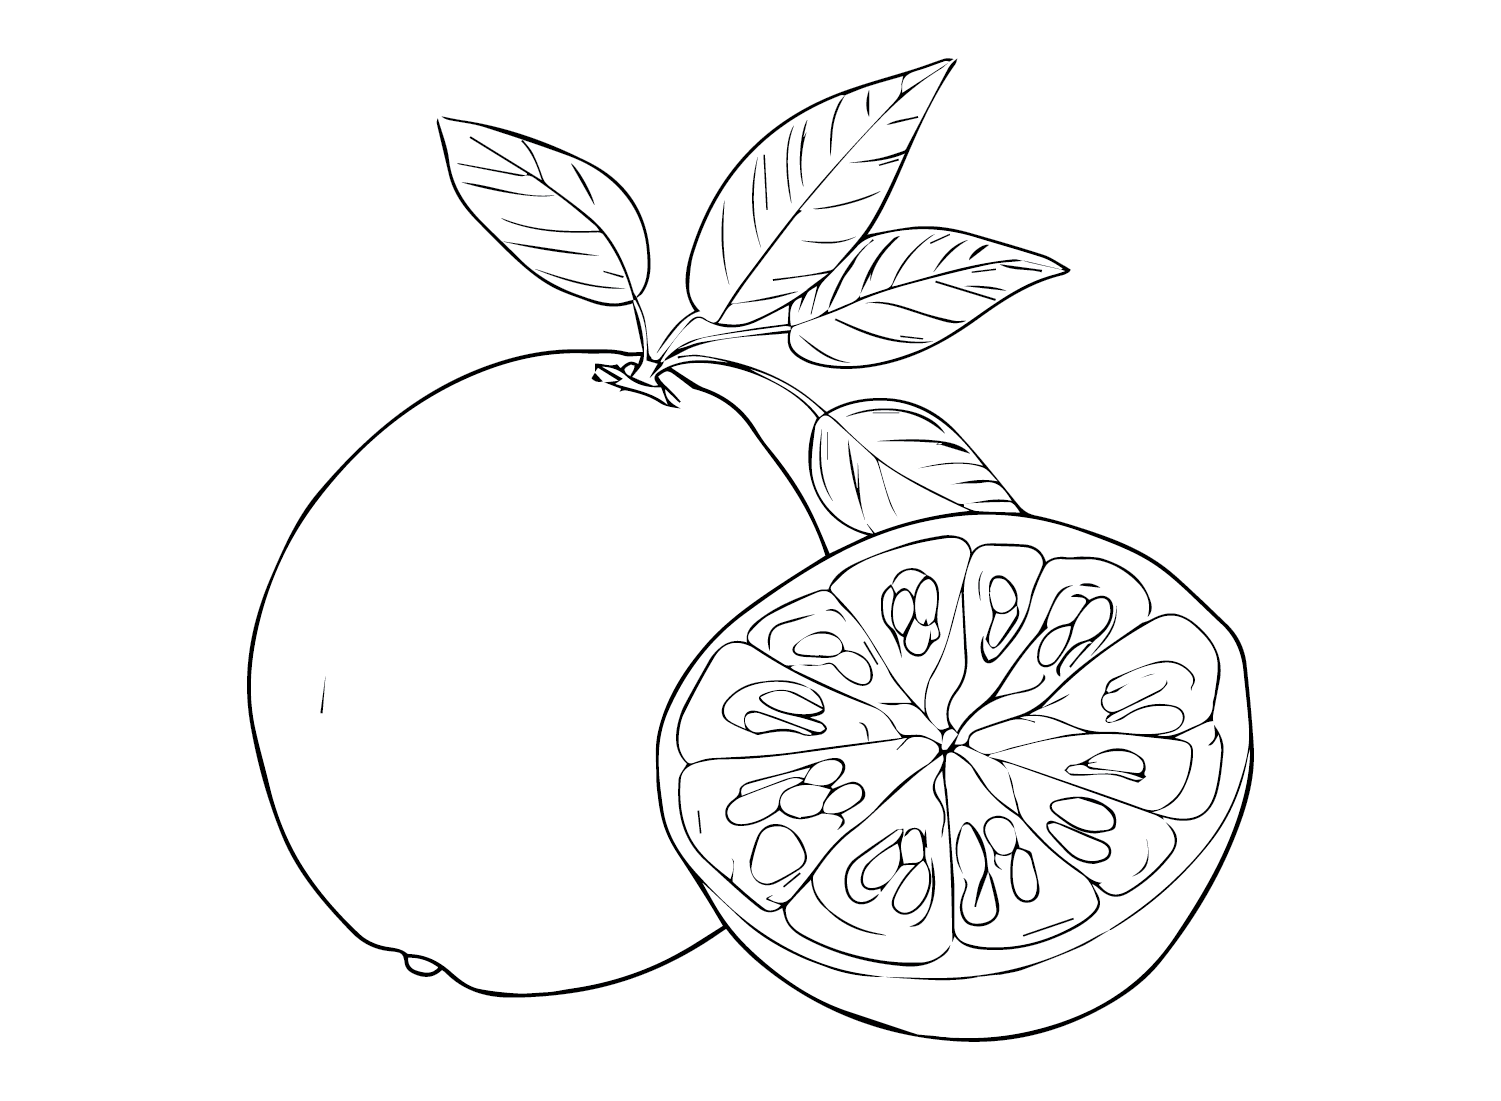 Pomelo Free Coloring Page